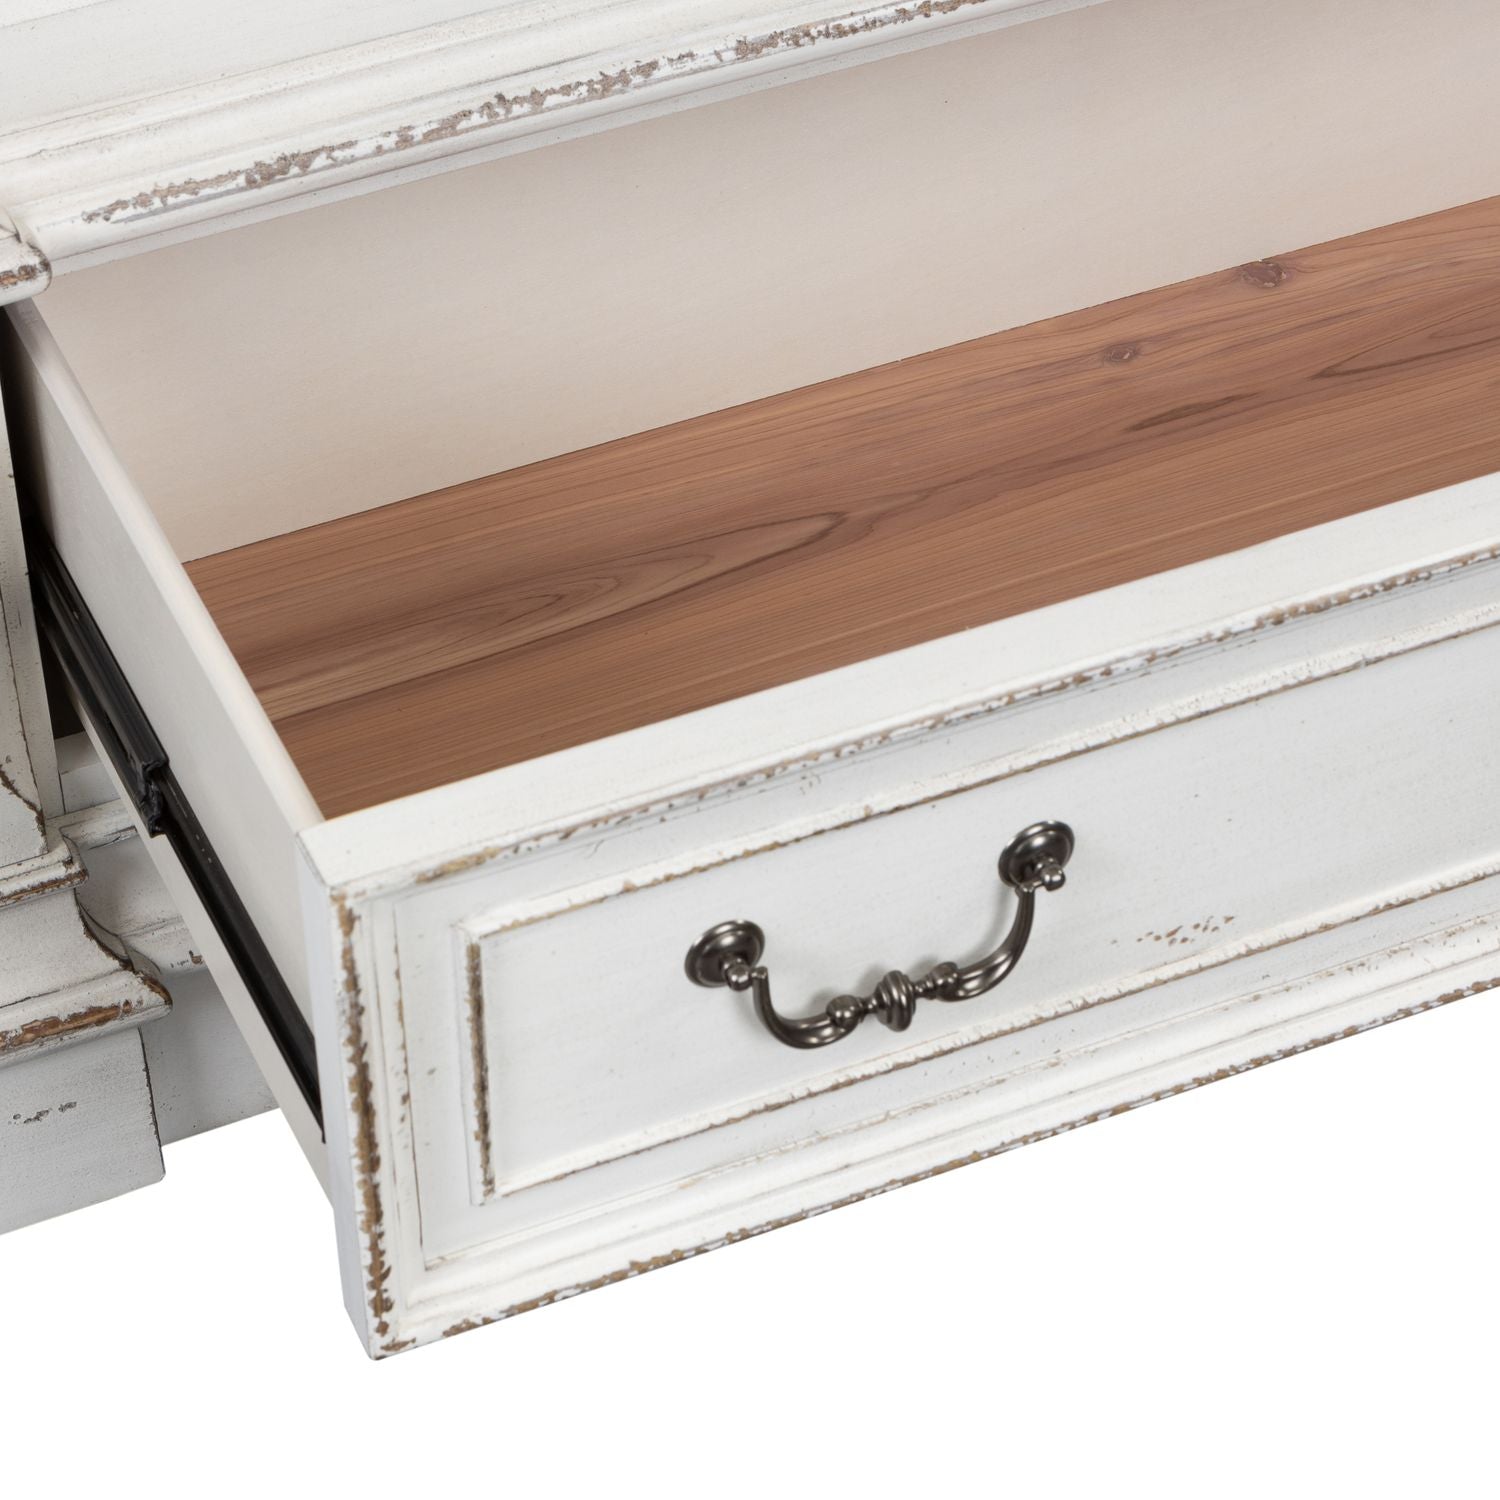 Abbey Park / Mirrored 2 Door Chest SKU: 520-BR42 Liberty Furniture